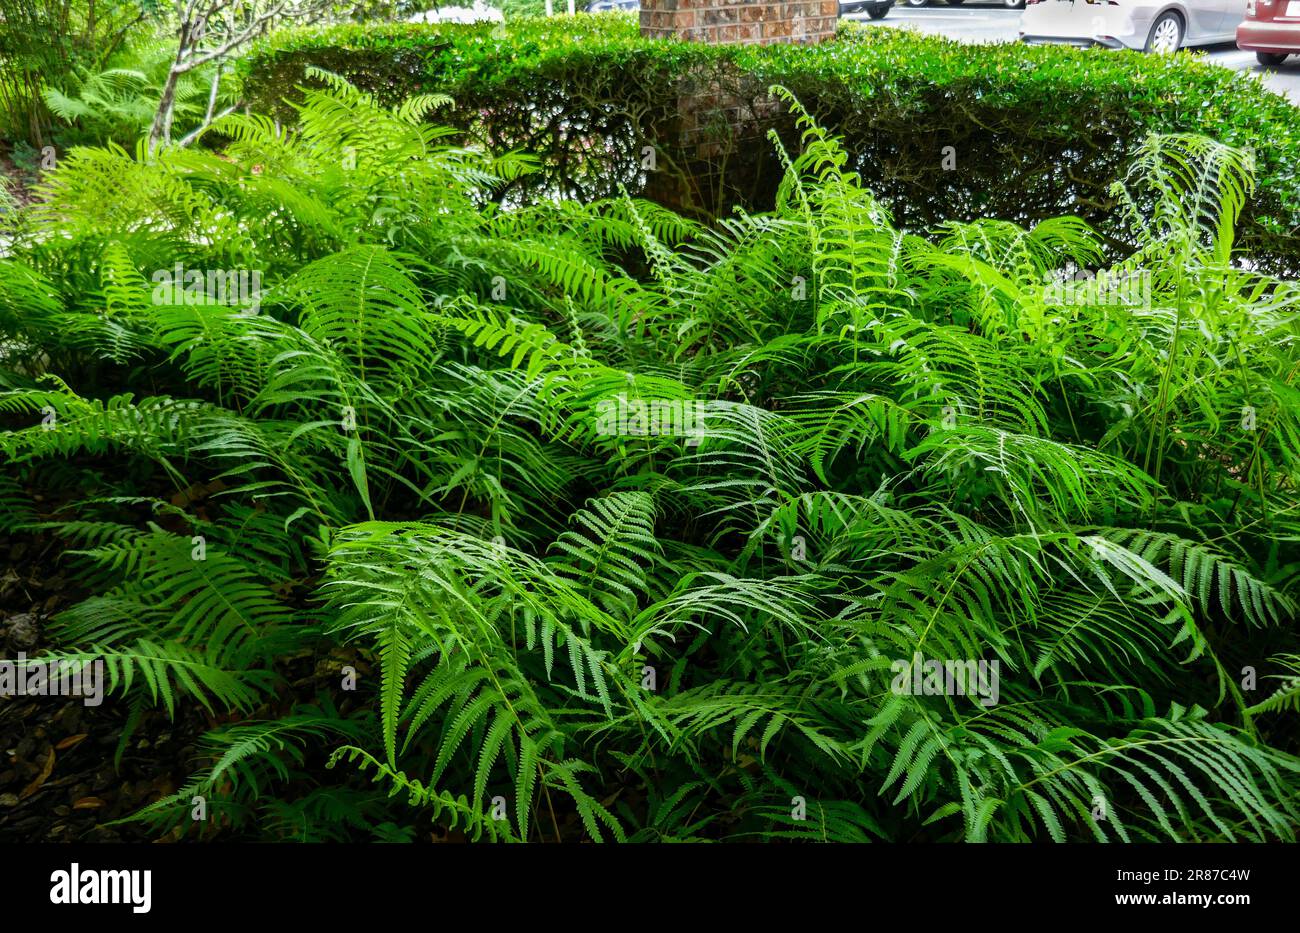 Landscape plants decorate an office building in North Florida. Stock Photo